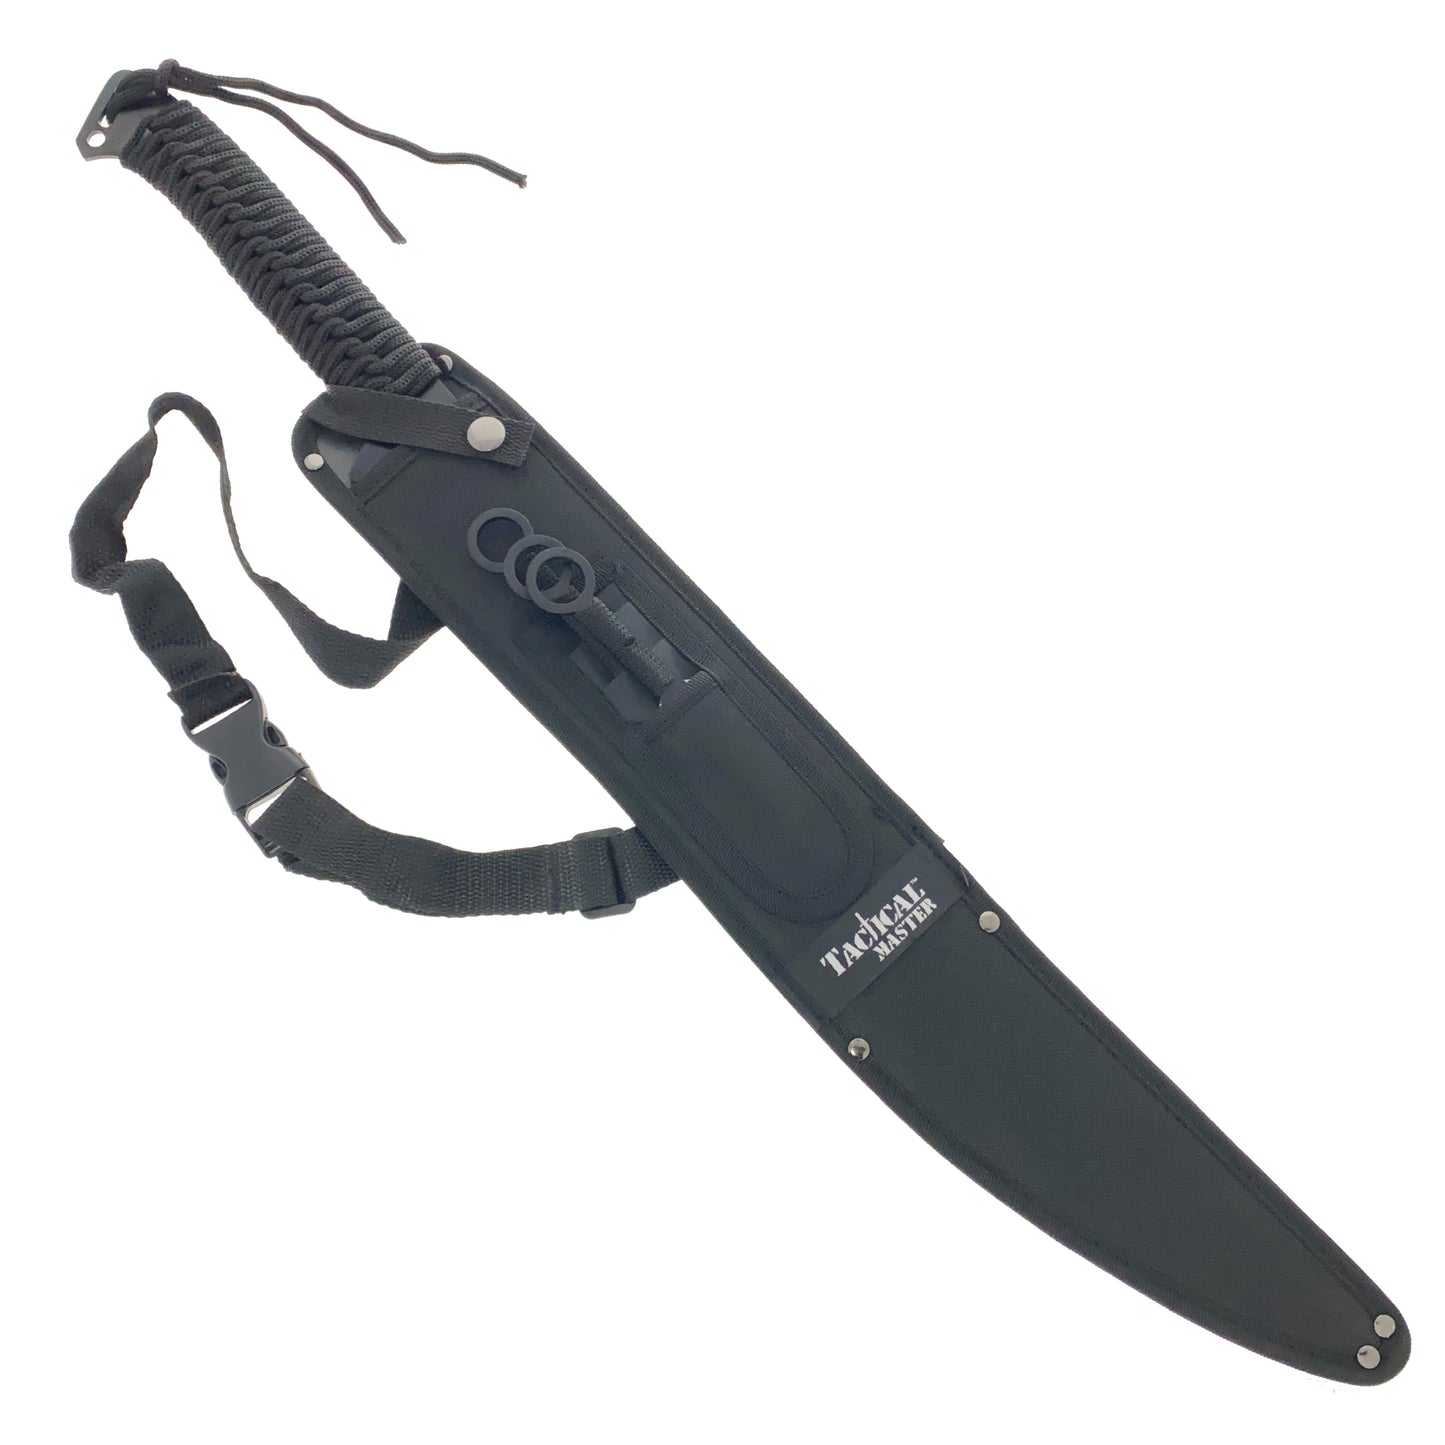 Tactical Master 28" Red Machete  w/ 3 Pcs Throwing Knives